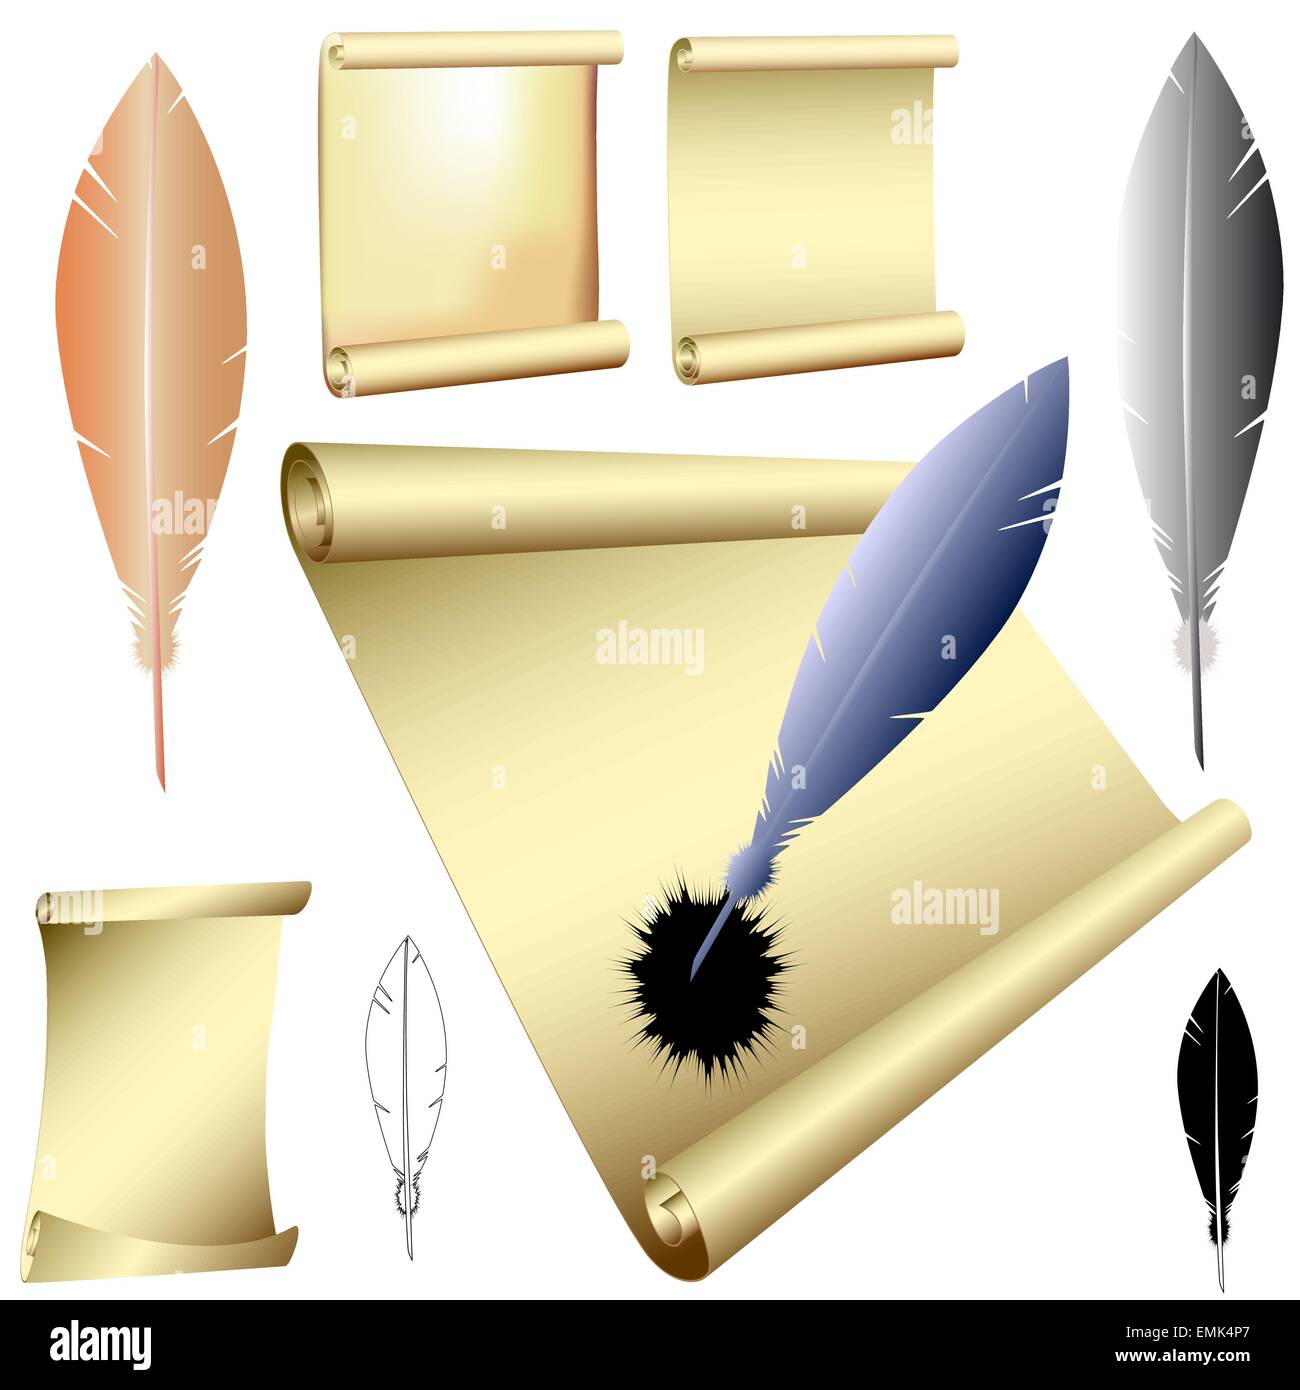 Vector illustration of the various quills and scrolls Stock Vector